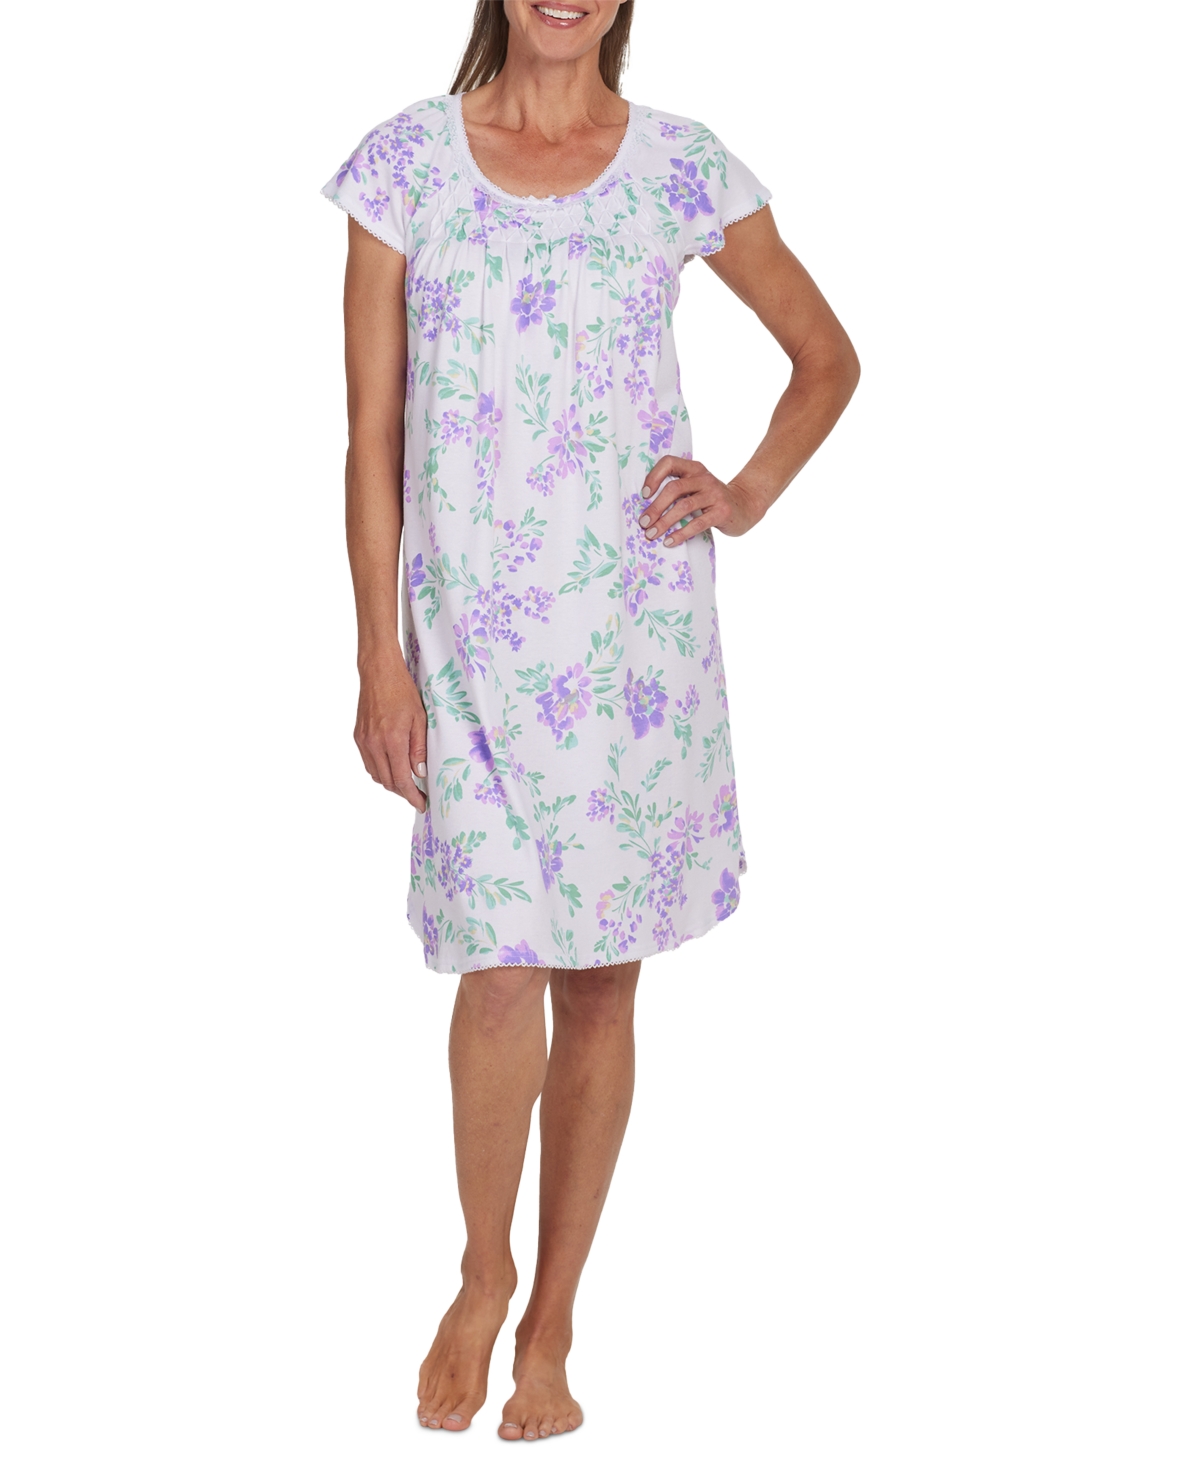 Women's Floral Short-Sleeve Nightgown - Lavender Flowers On White